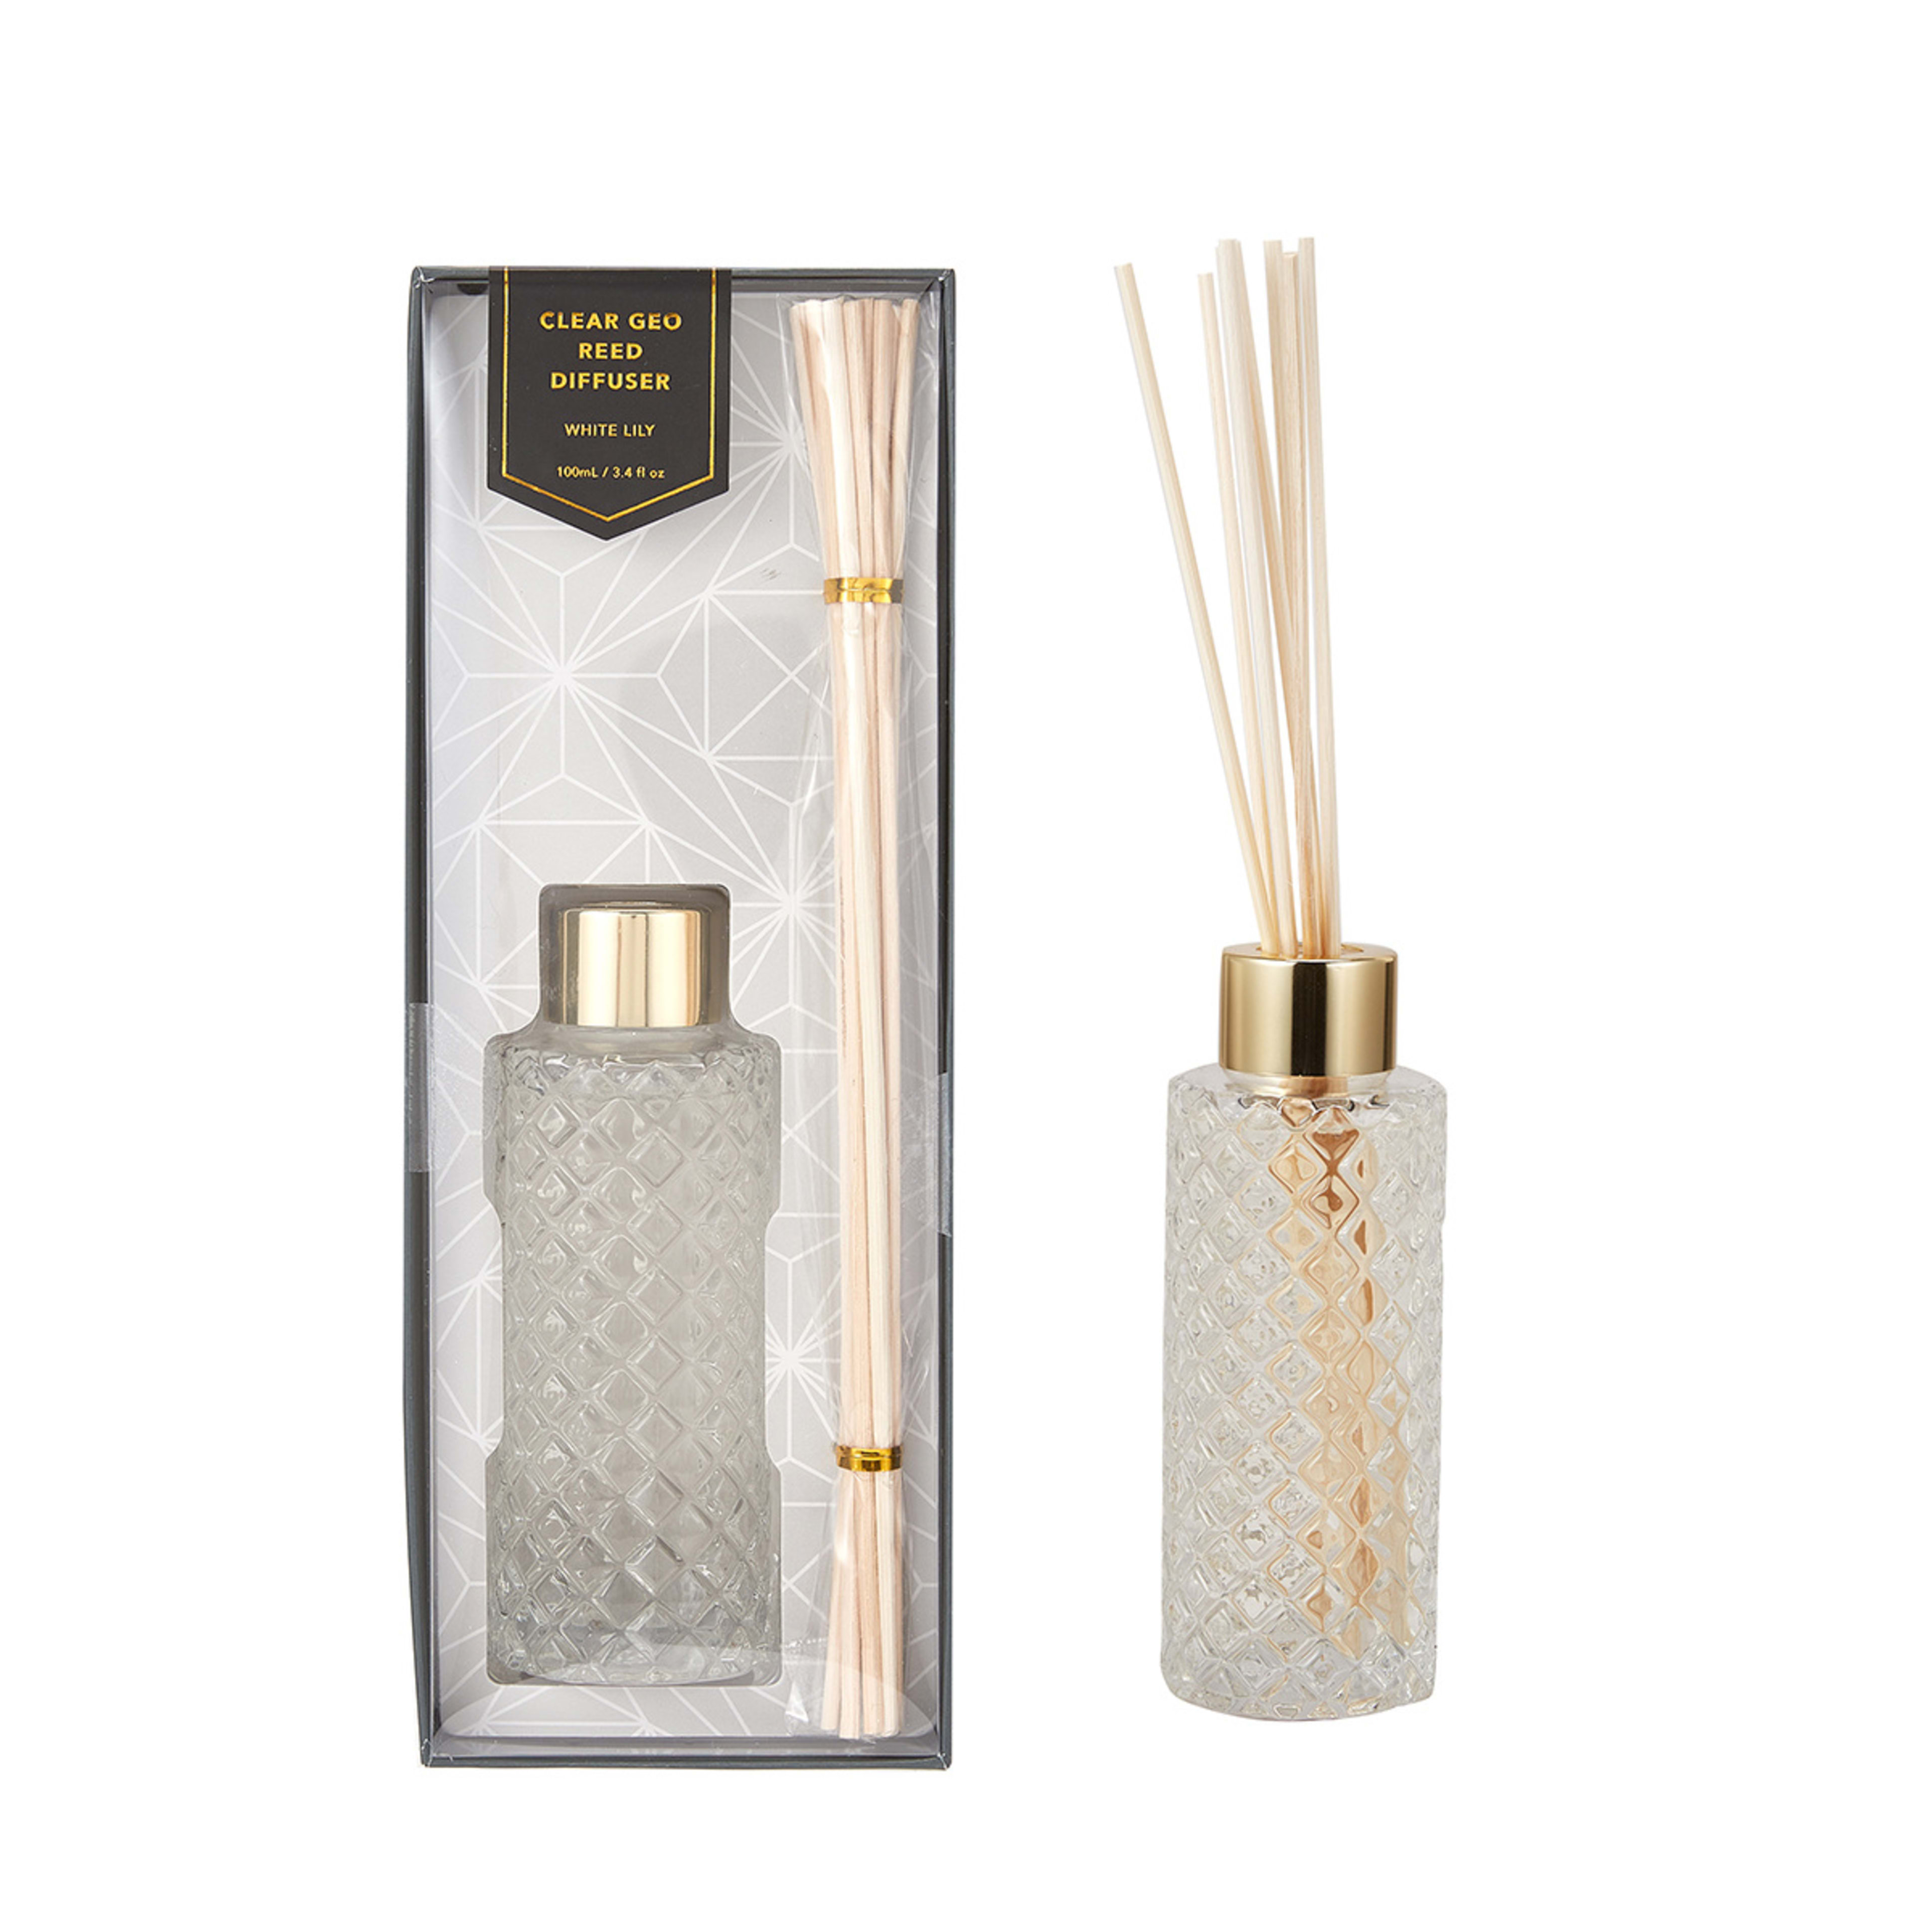 Clear Geo Reed Diffuser 100ml